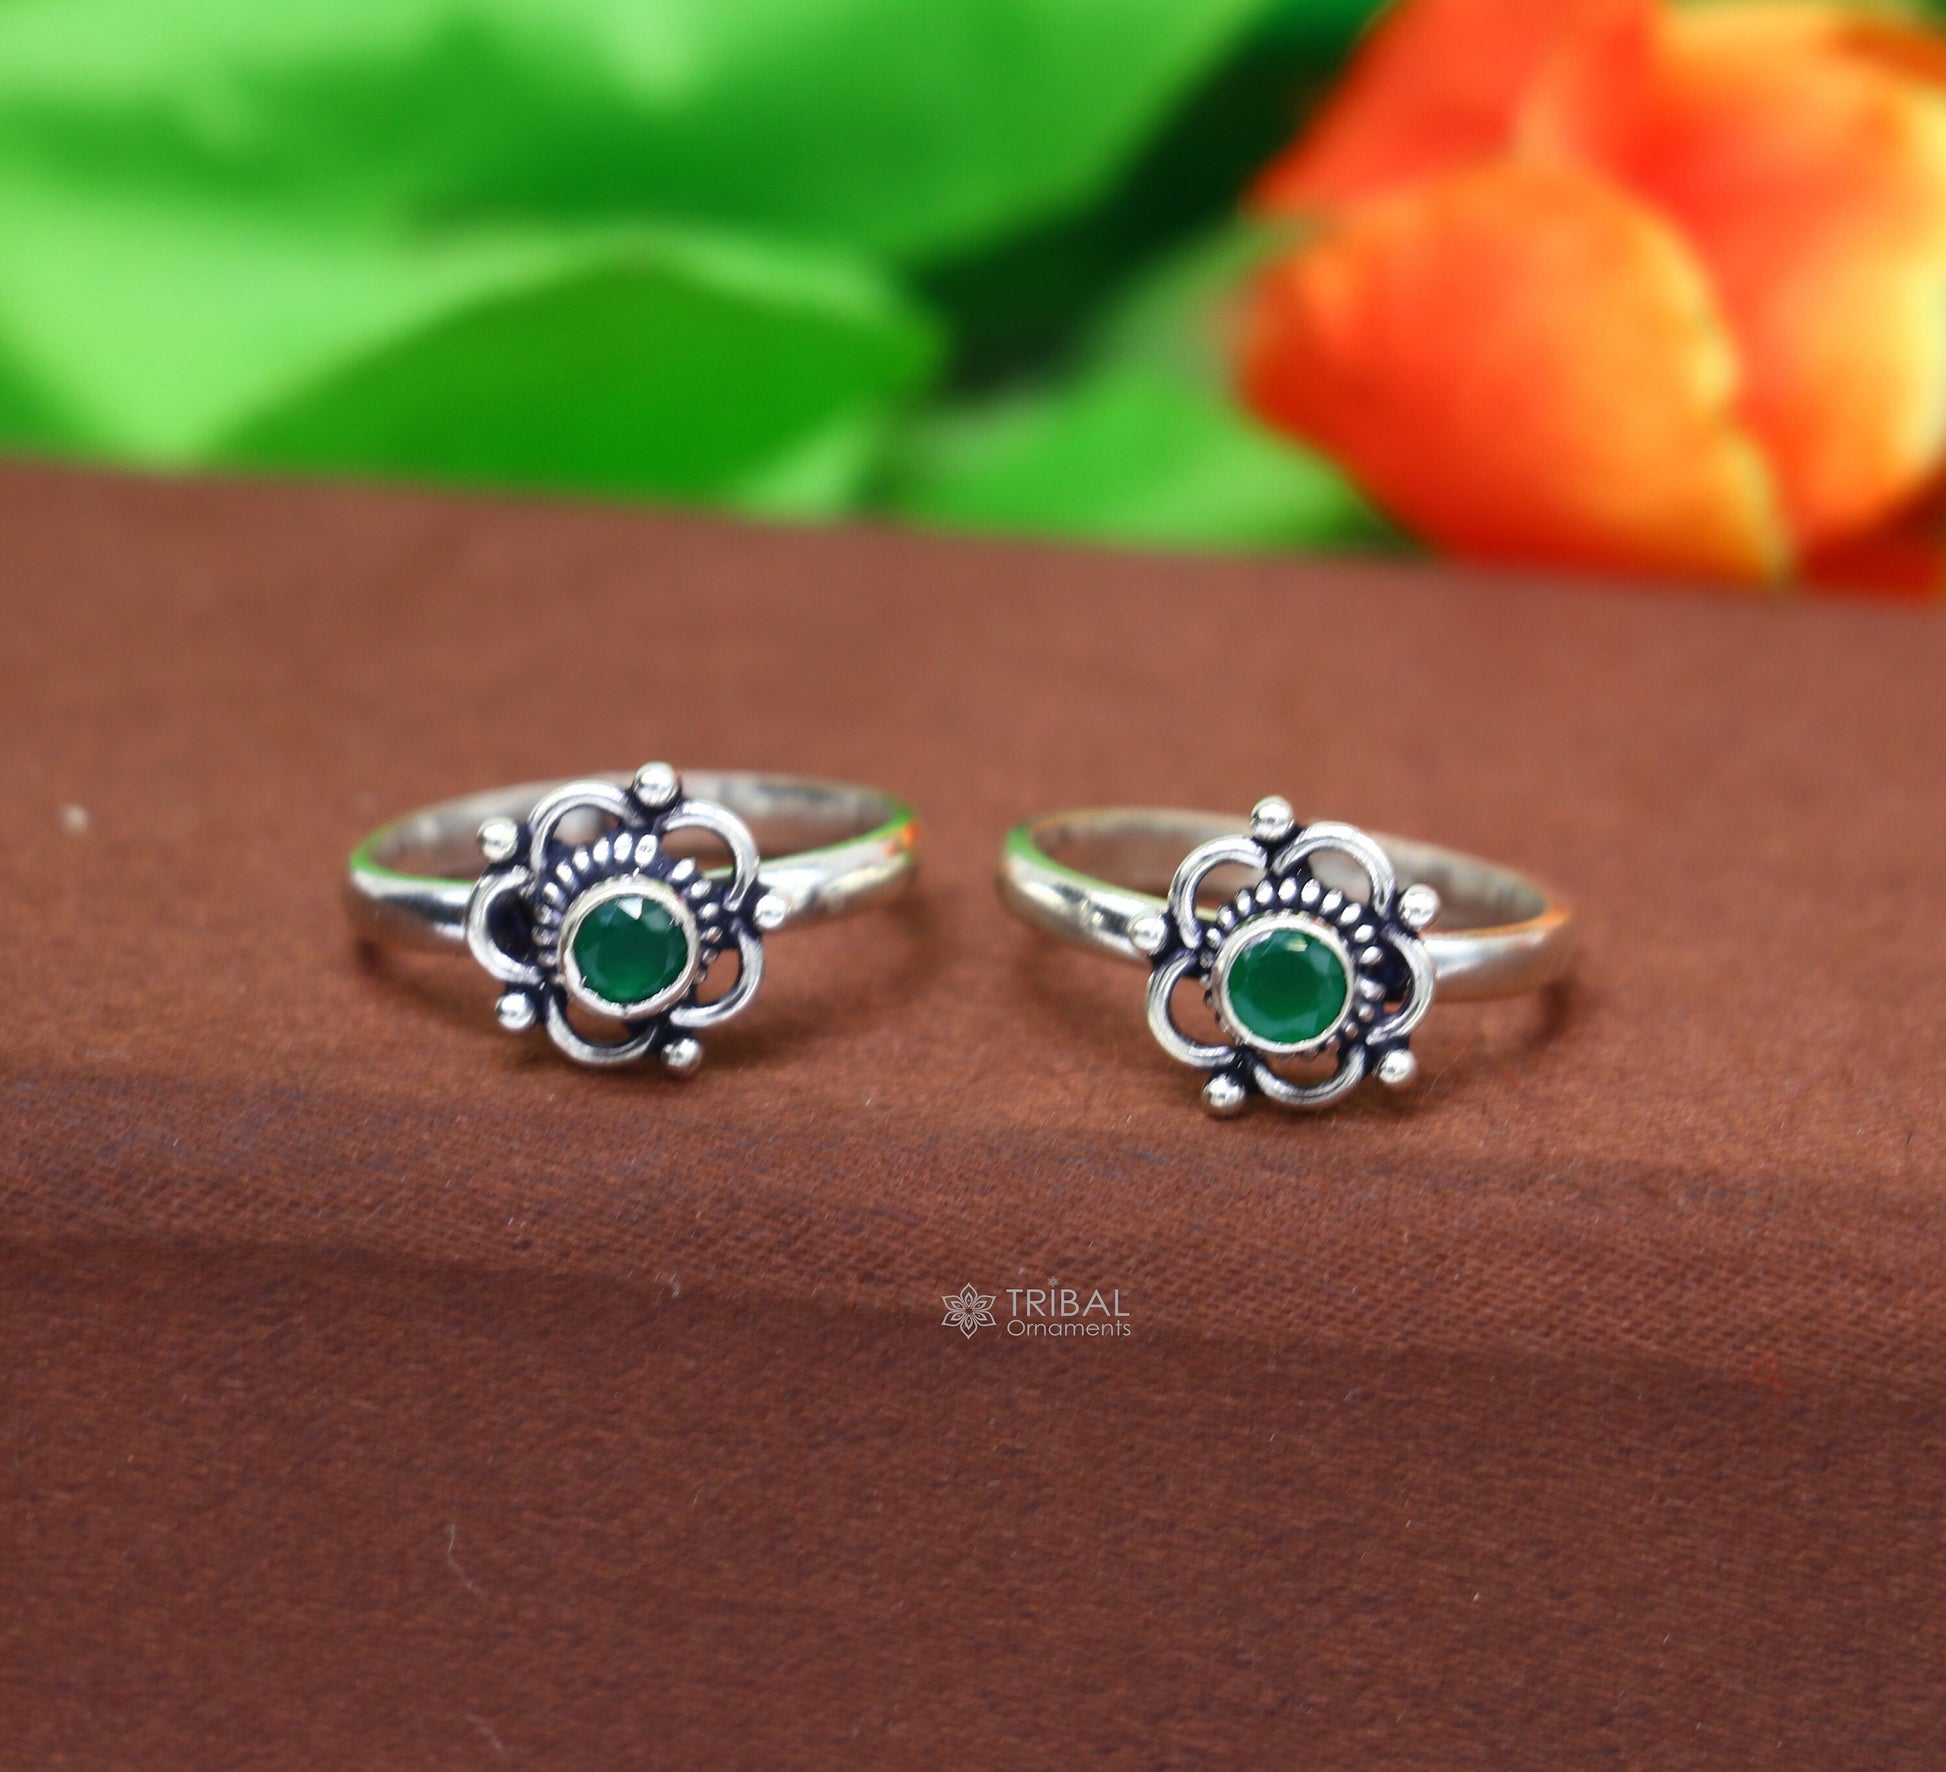 925 sterling silver handmade fabulous tiny green stone toe ring band tribal belly cultural ethnic jewelry from India ntr104 - TRIBAL ORNAMENTS